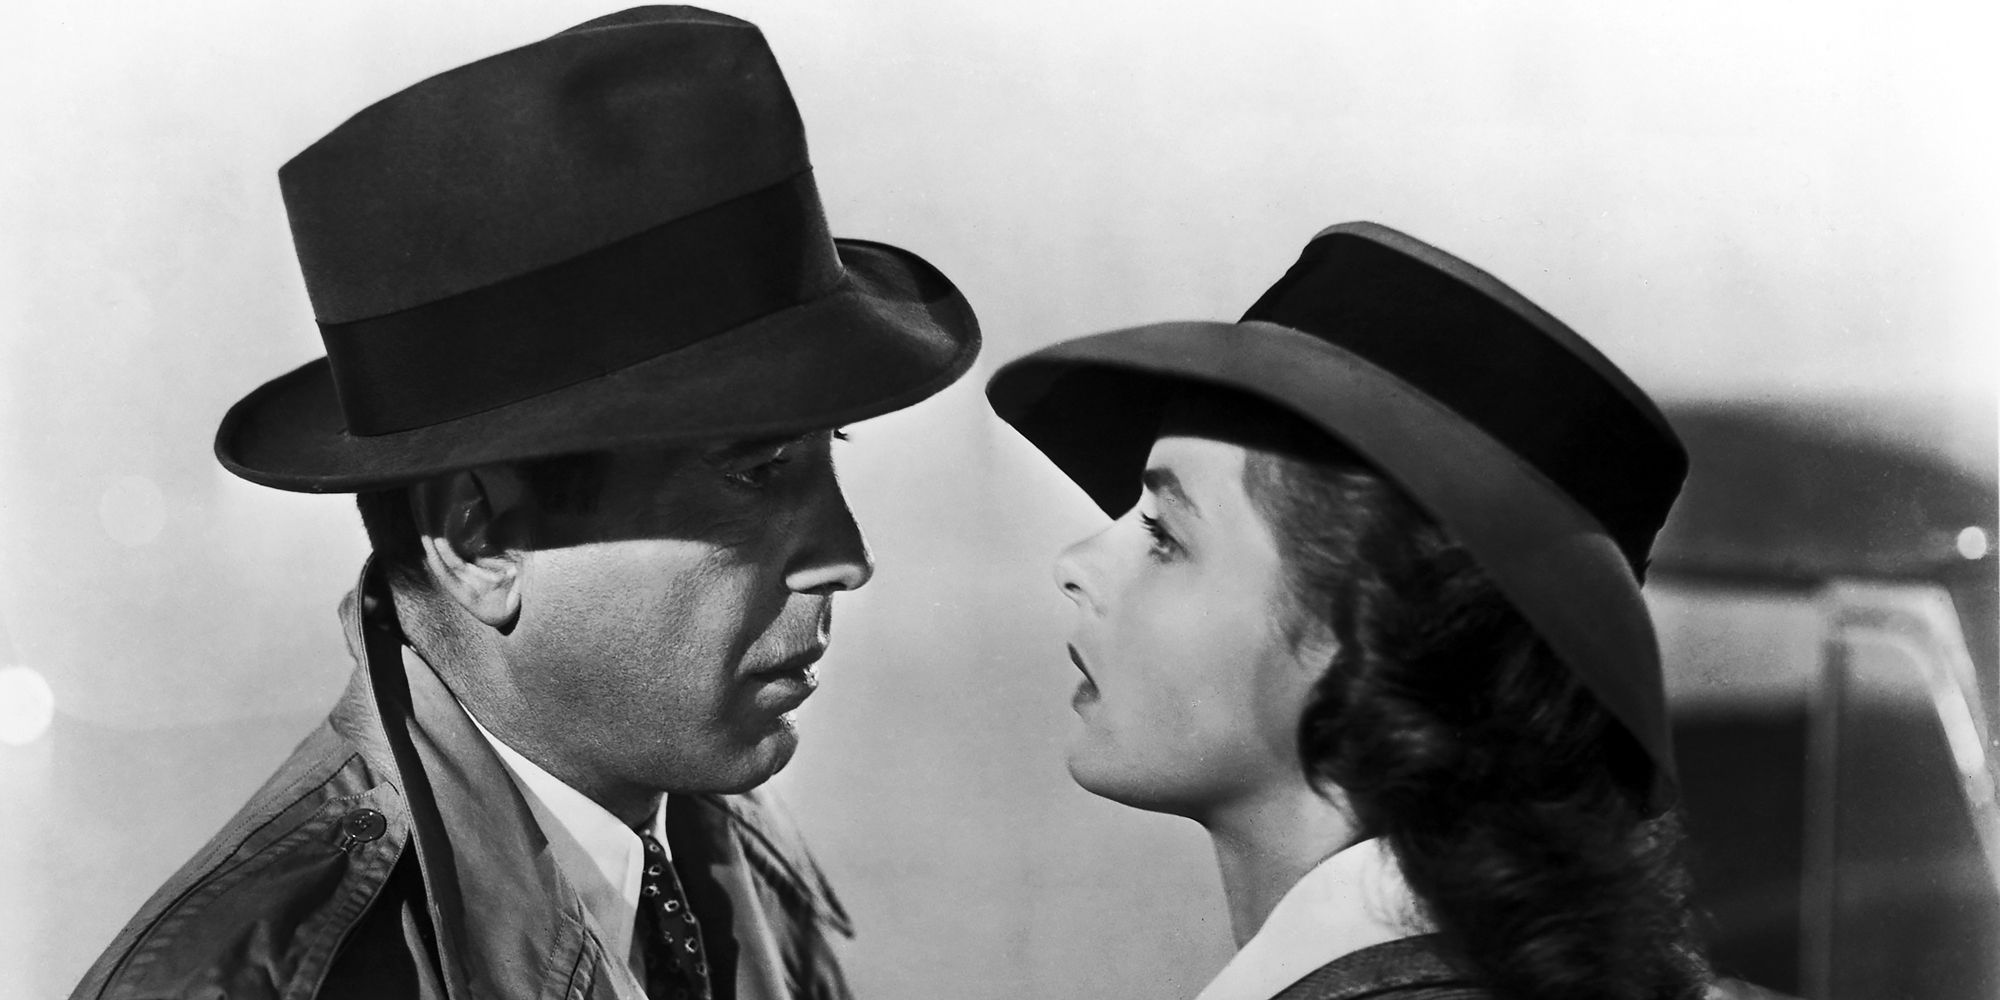 Rick Blaine and Ilsa Lund looking at each other in Casablanca